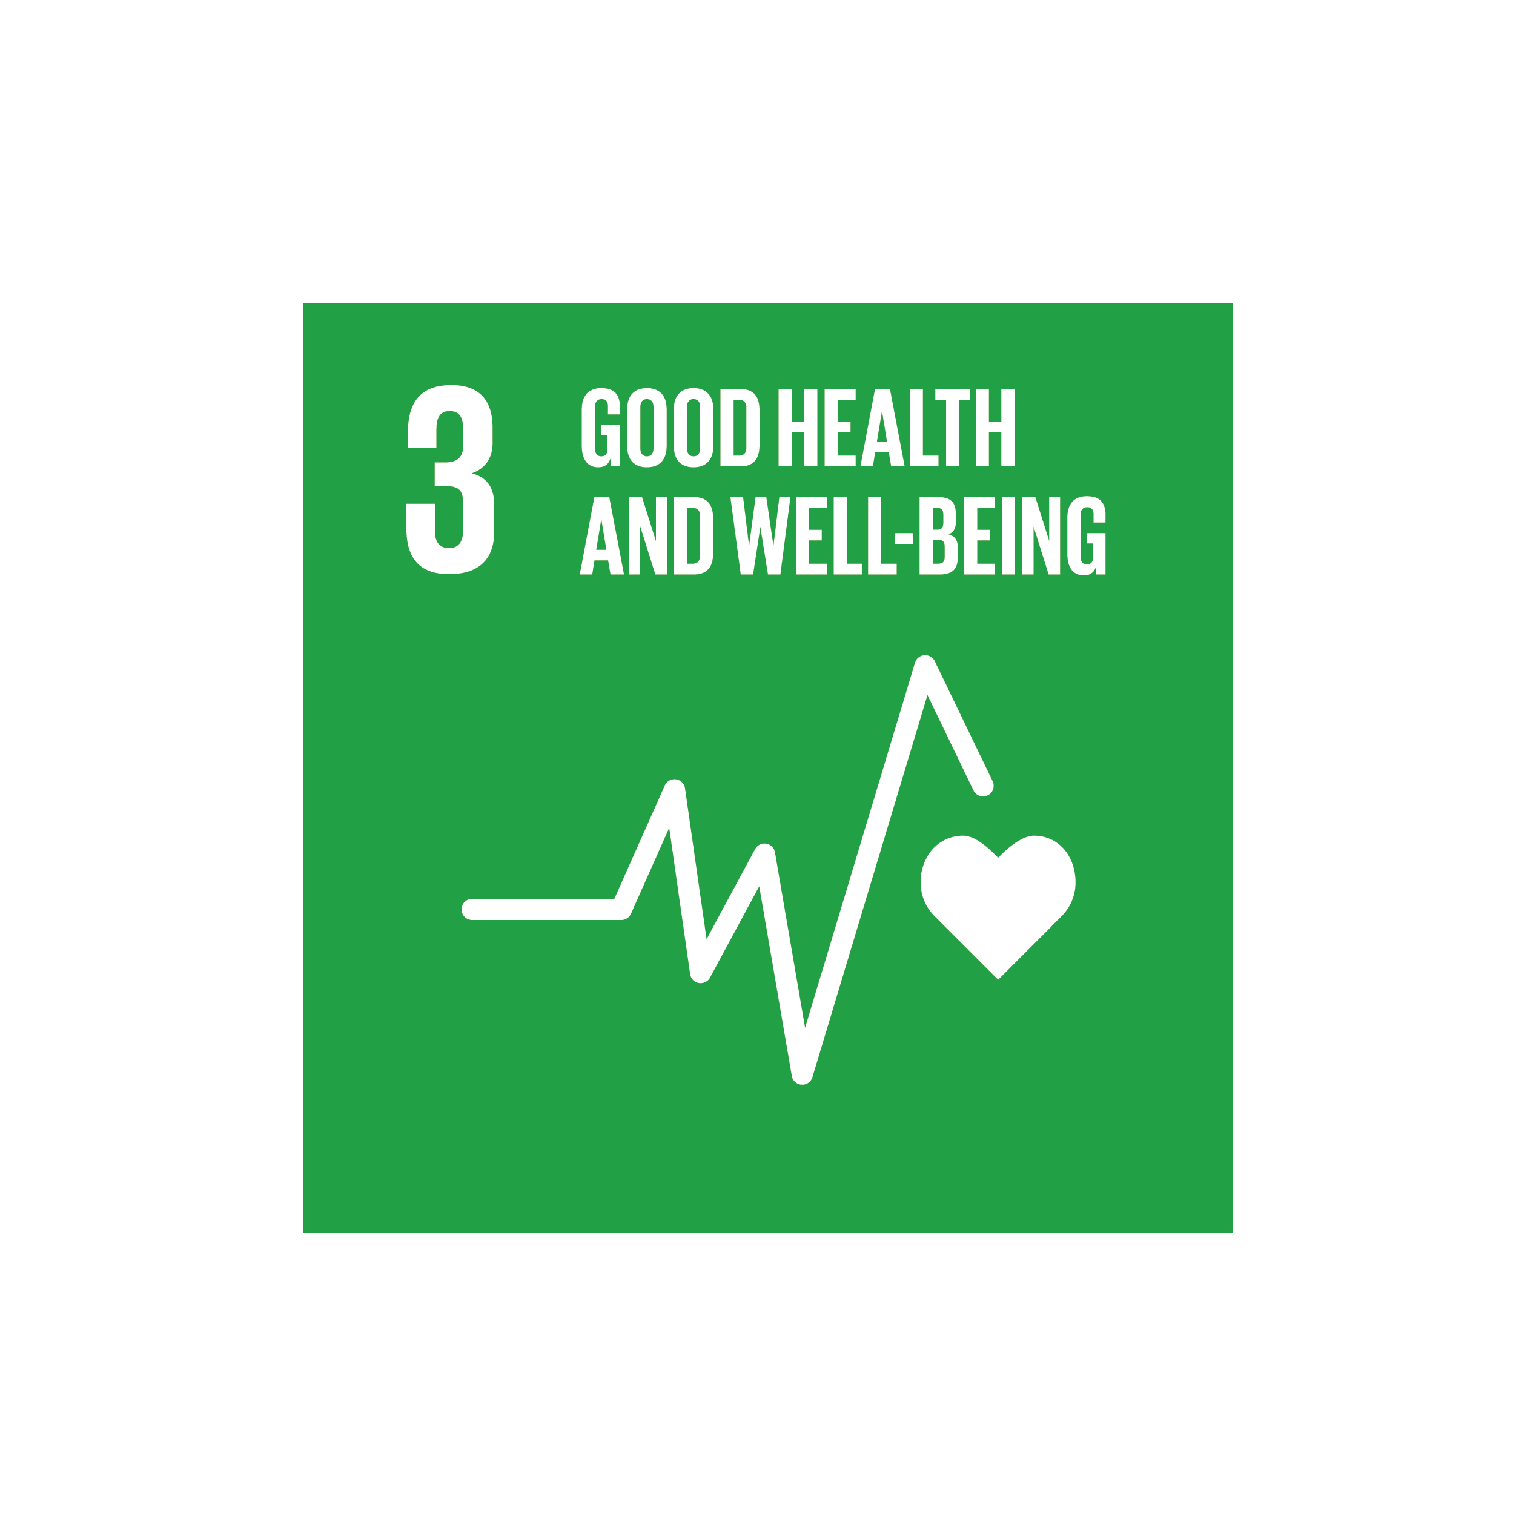 3: Good health and wellbeing